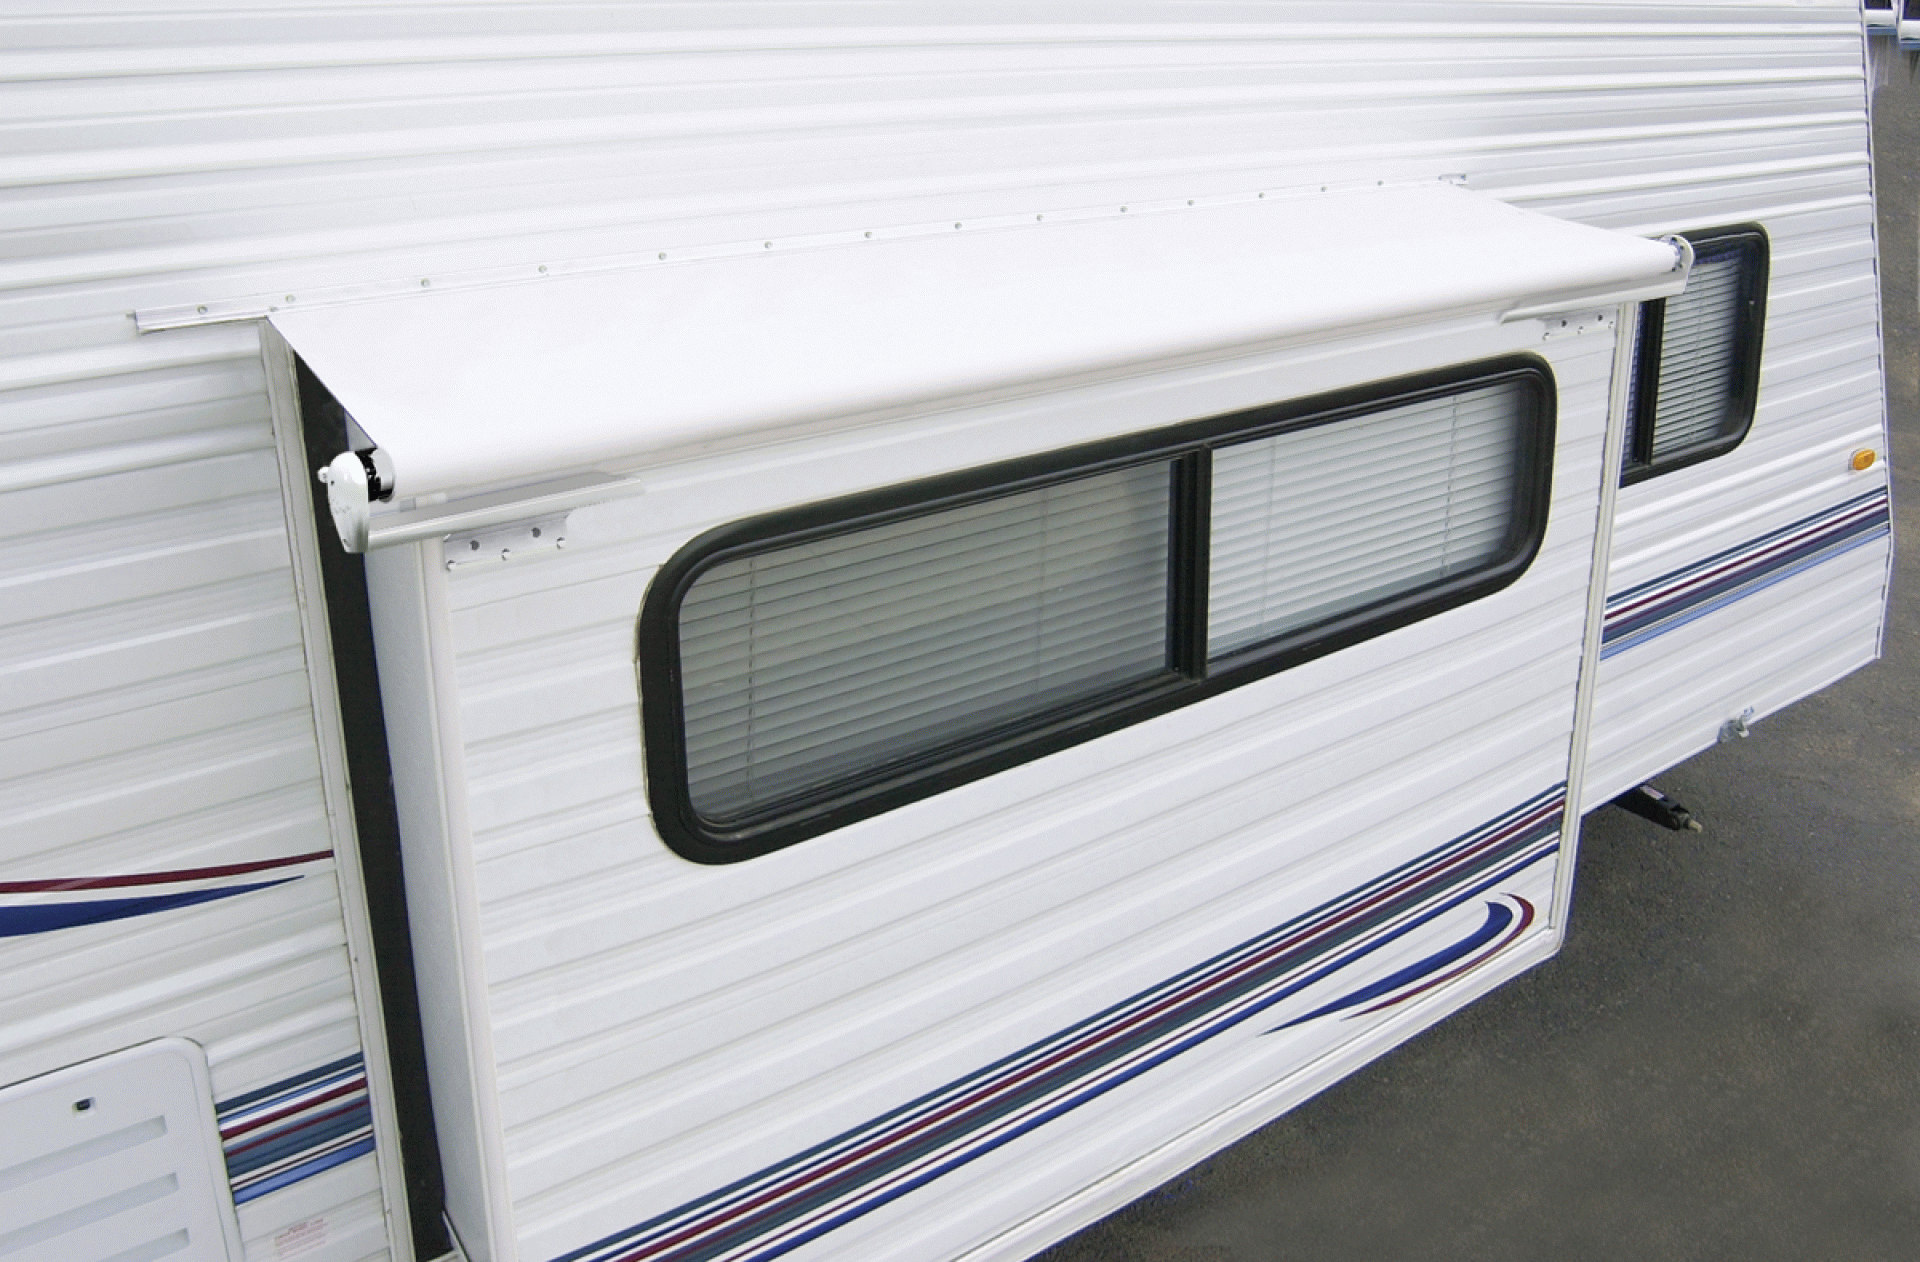 CAREFREE OF COLORADO | LH1690042 | SLIDEOUT COVER AWNING 162" - 169.9" ROOF RANGE WHITE VINYL